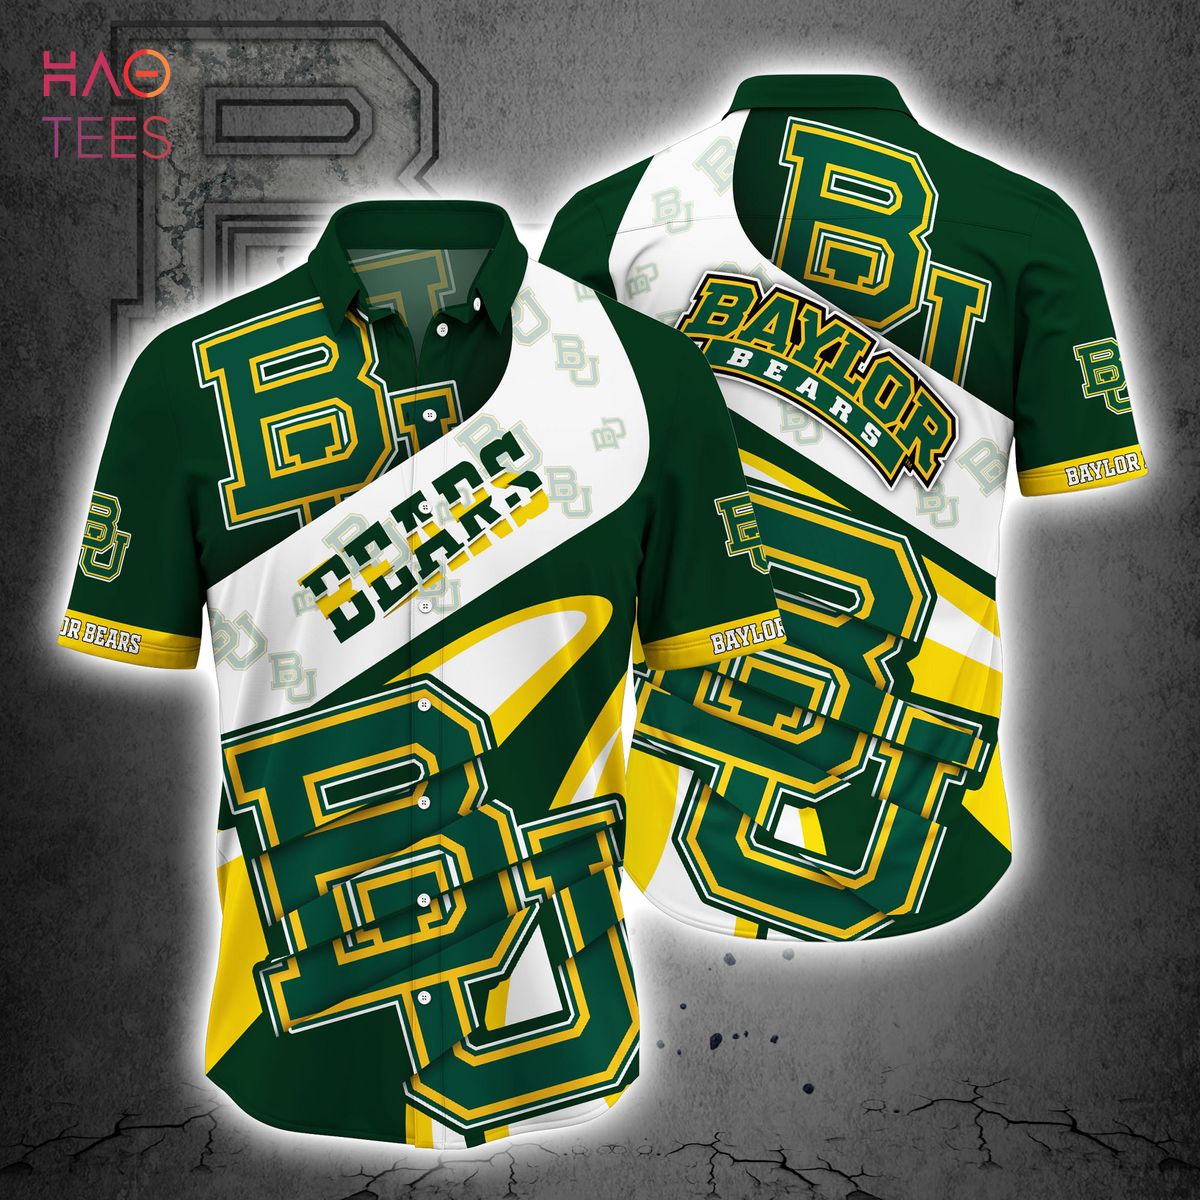 Baylor University - Embroidered Cropped Baseball Jersey - Green